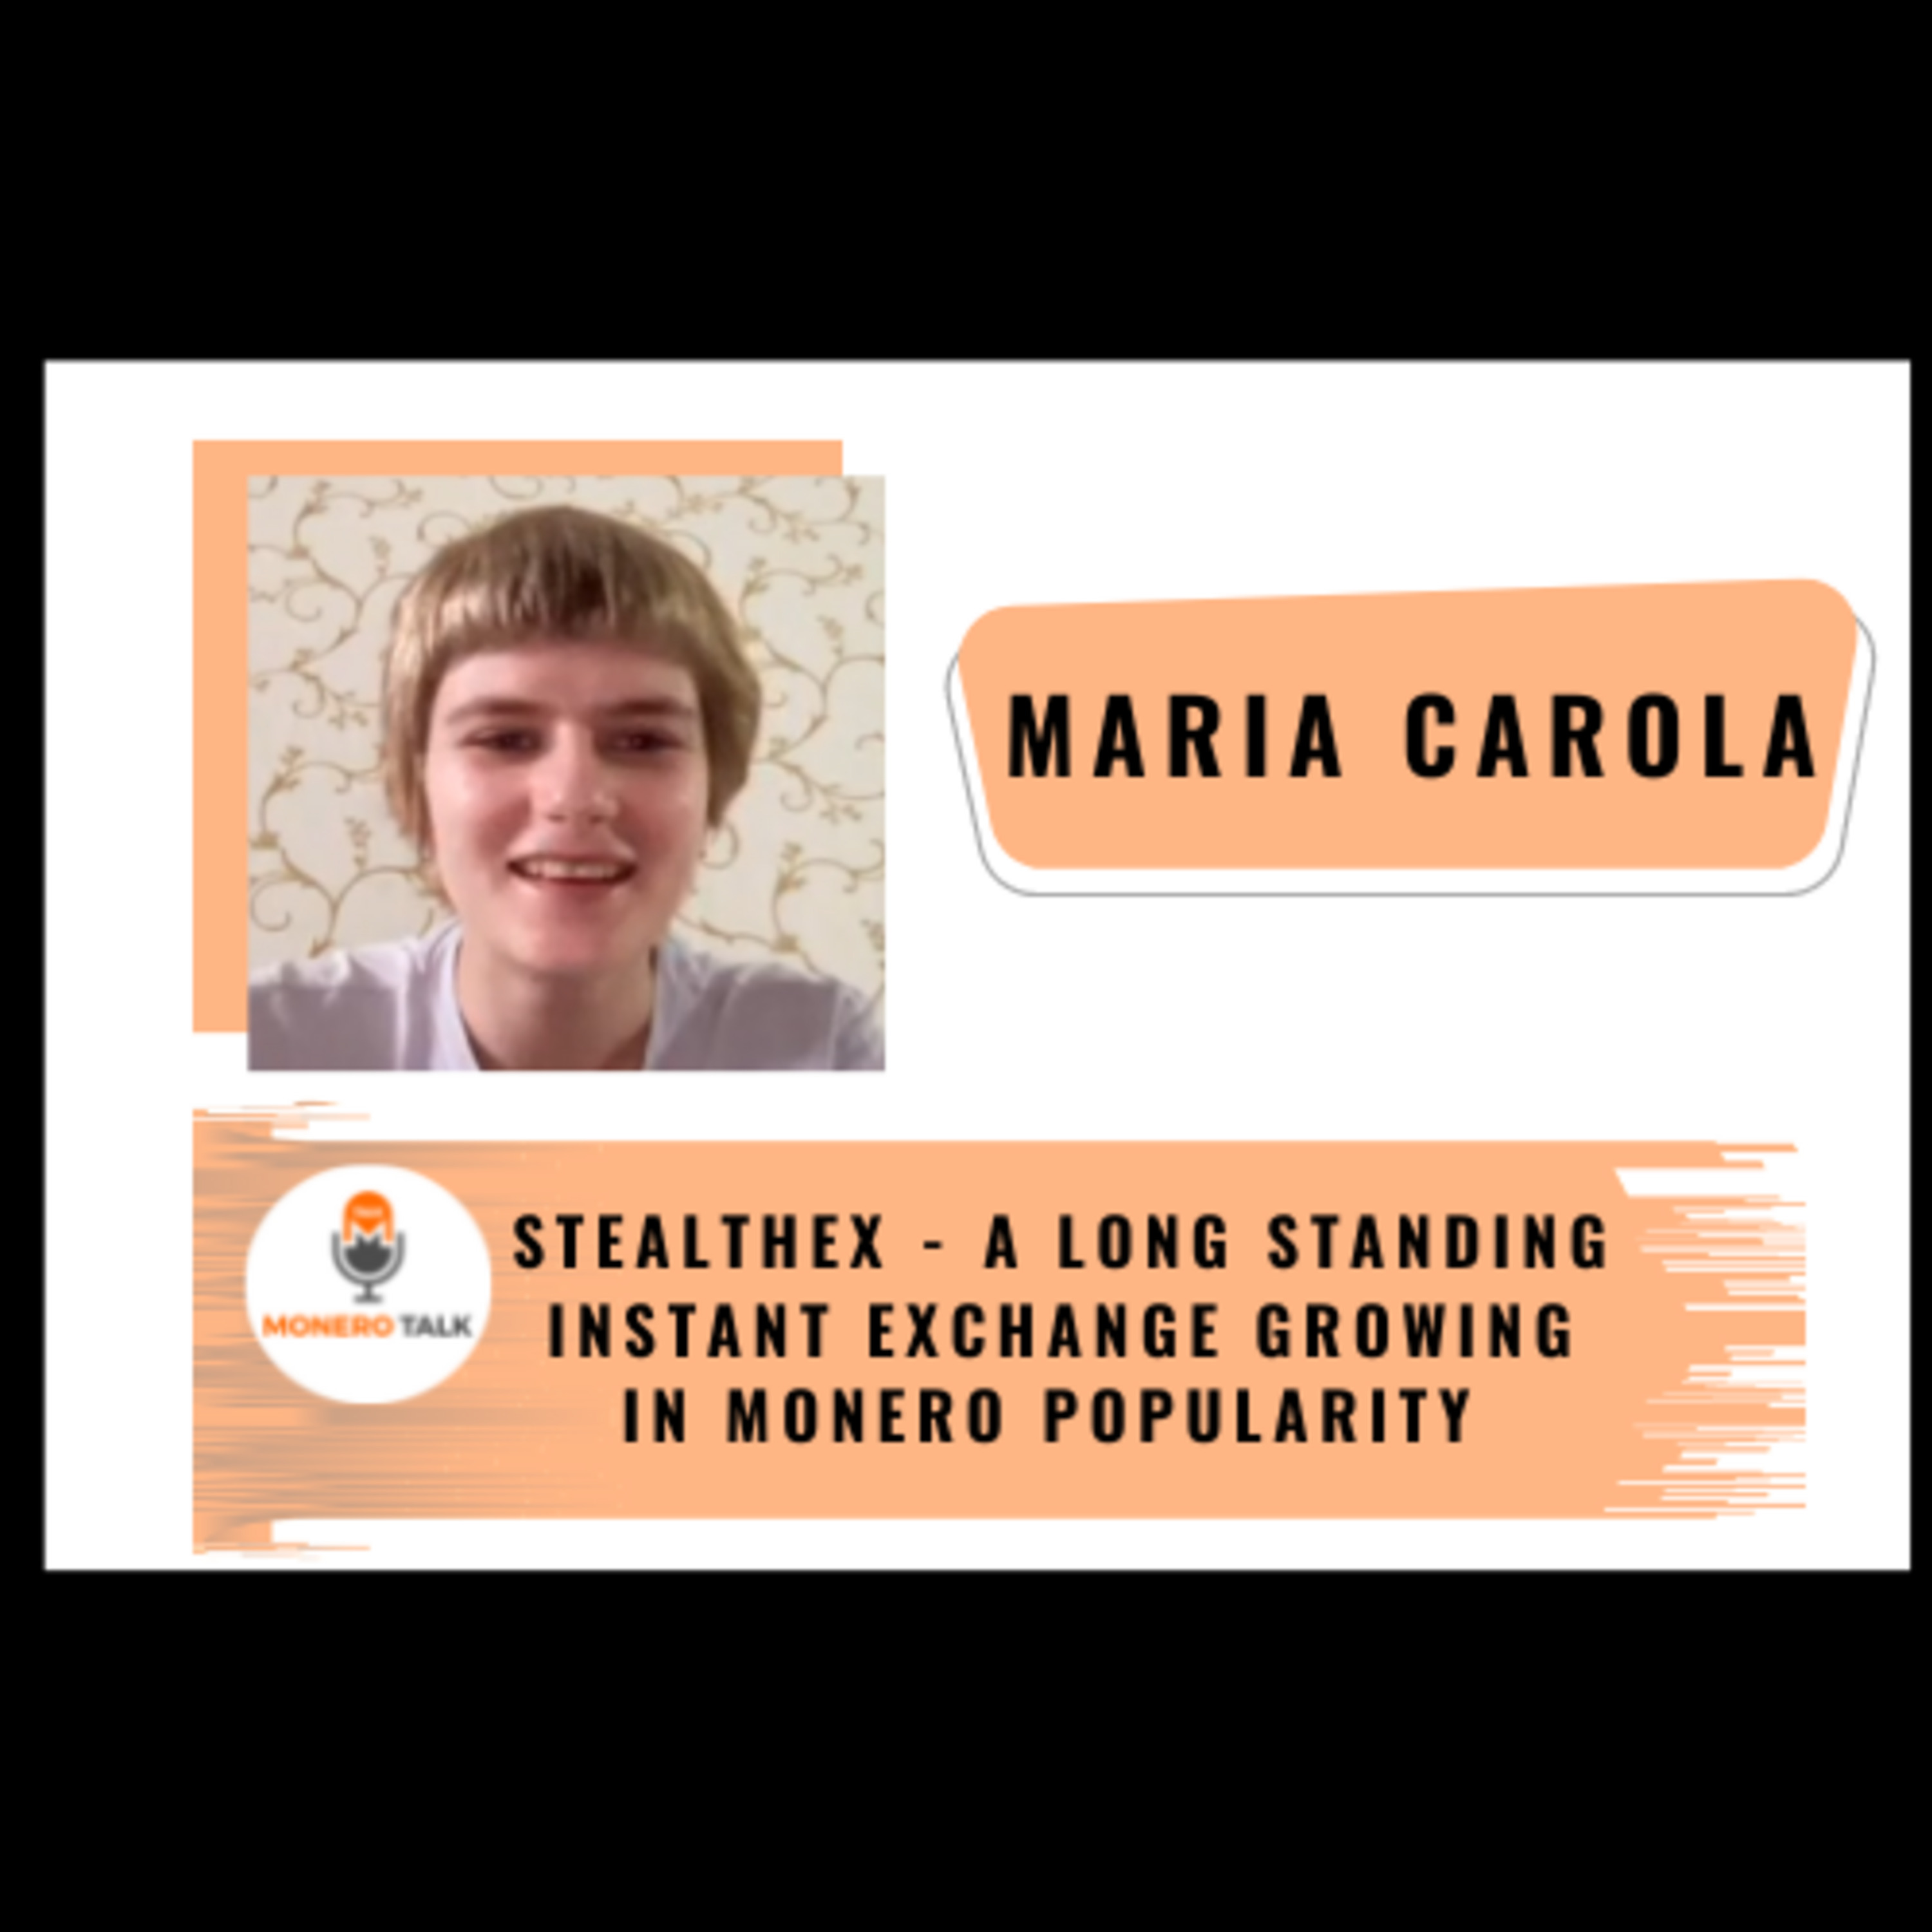 StealthEx — A long standing Instant Exchange growing in Monero popularity with — Maria Carola